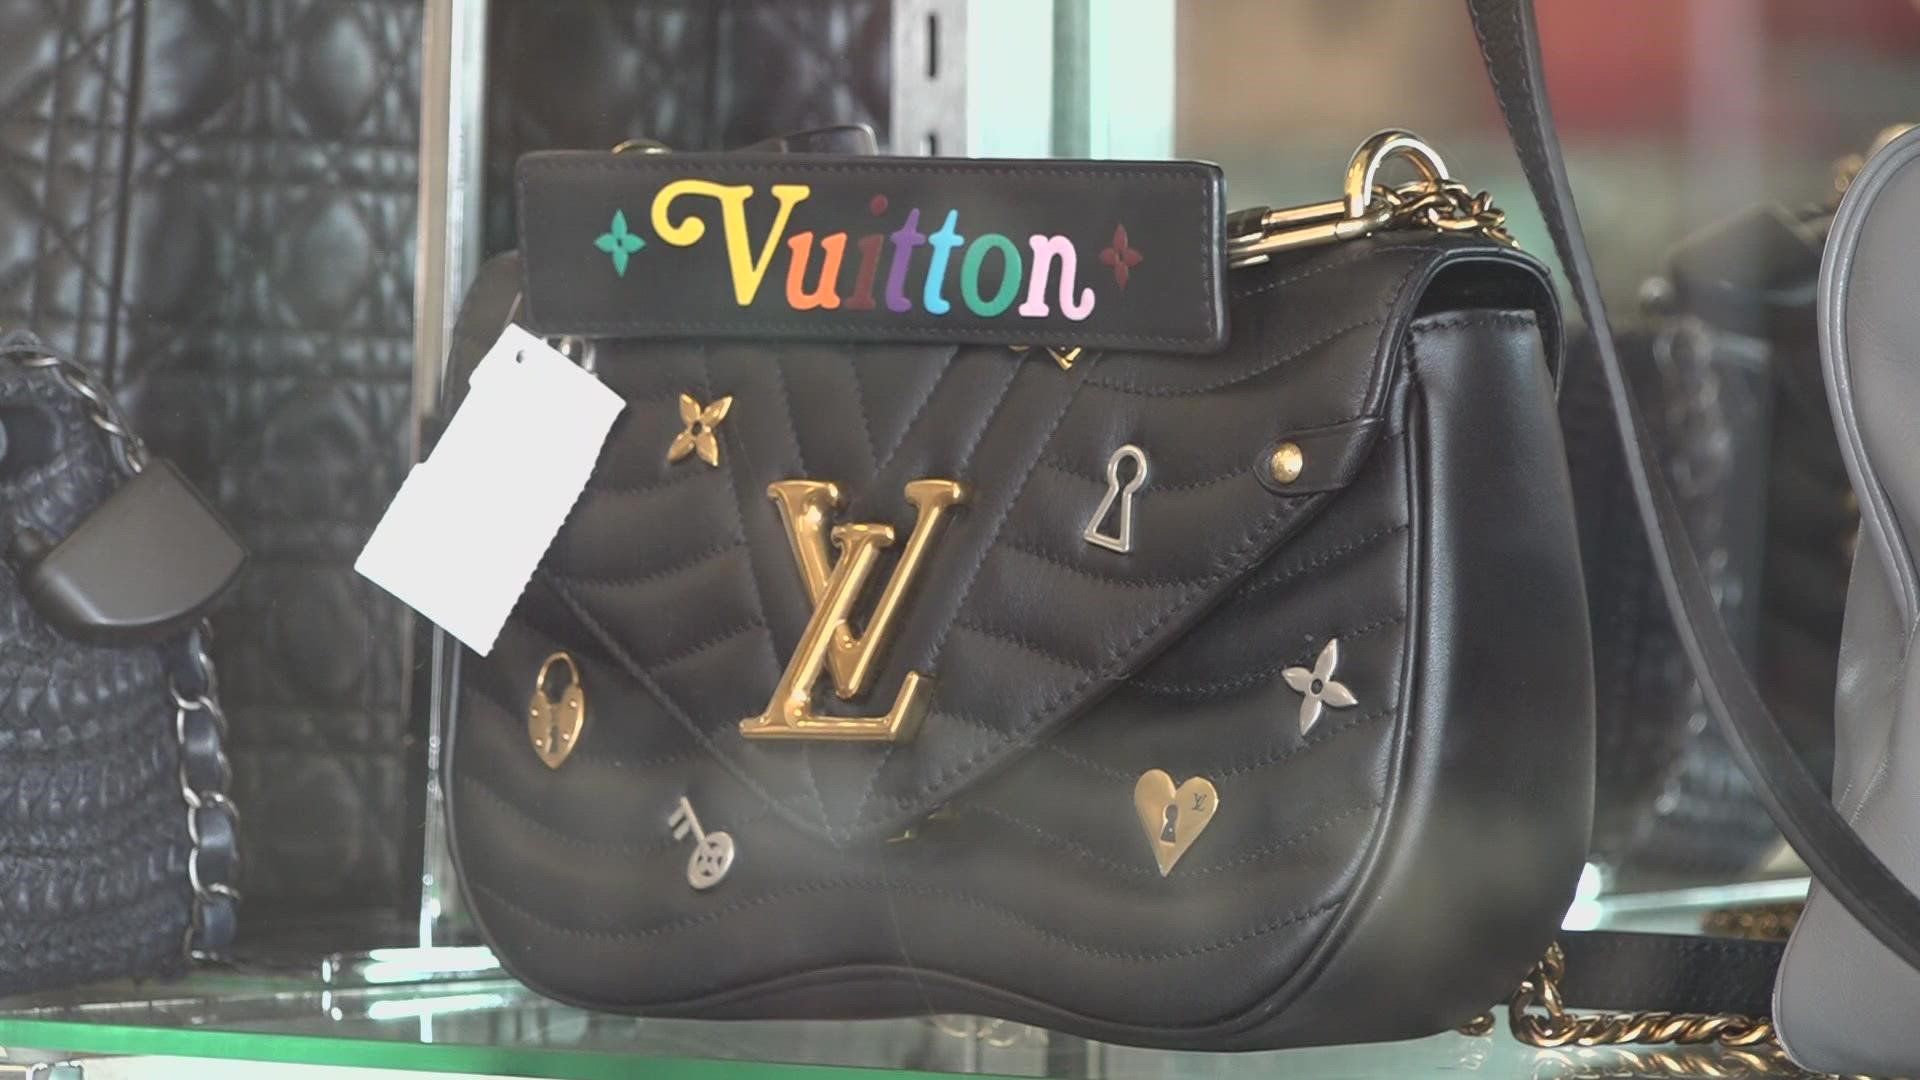 BASIC: That time I found Louis Vuitton at the Goodwill Thrift